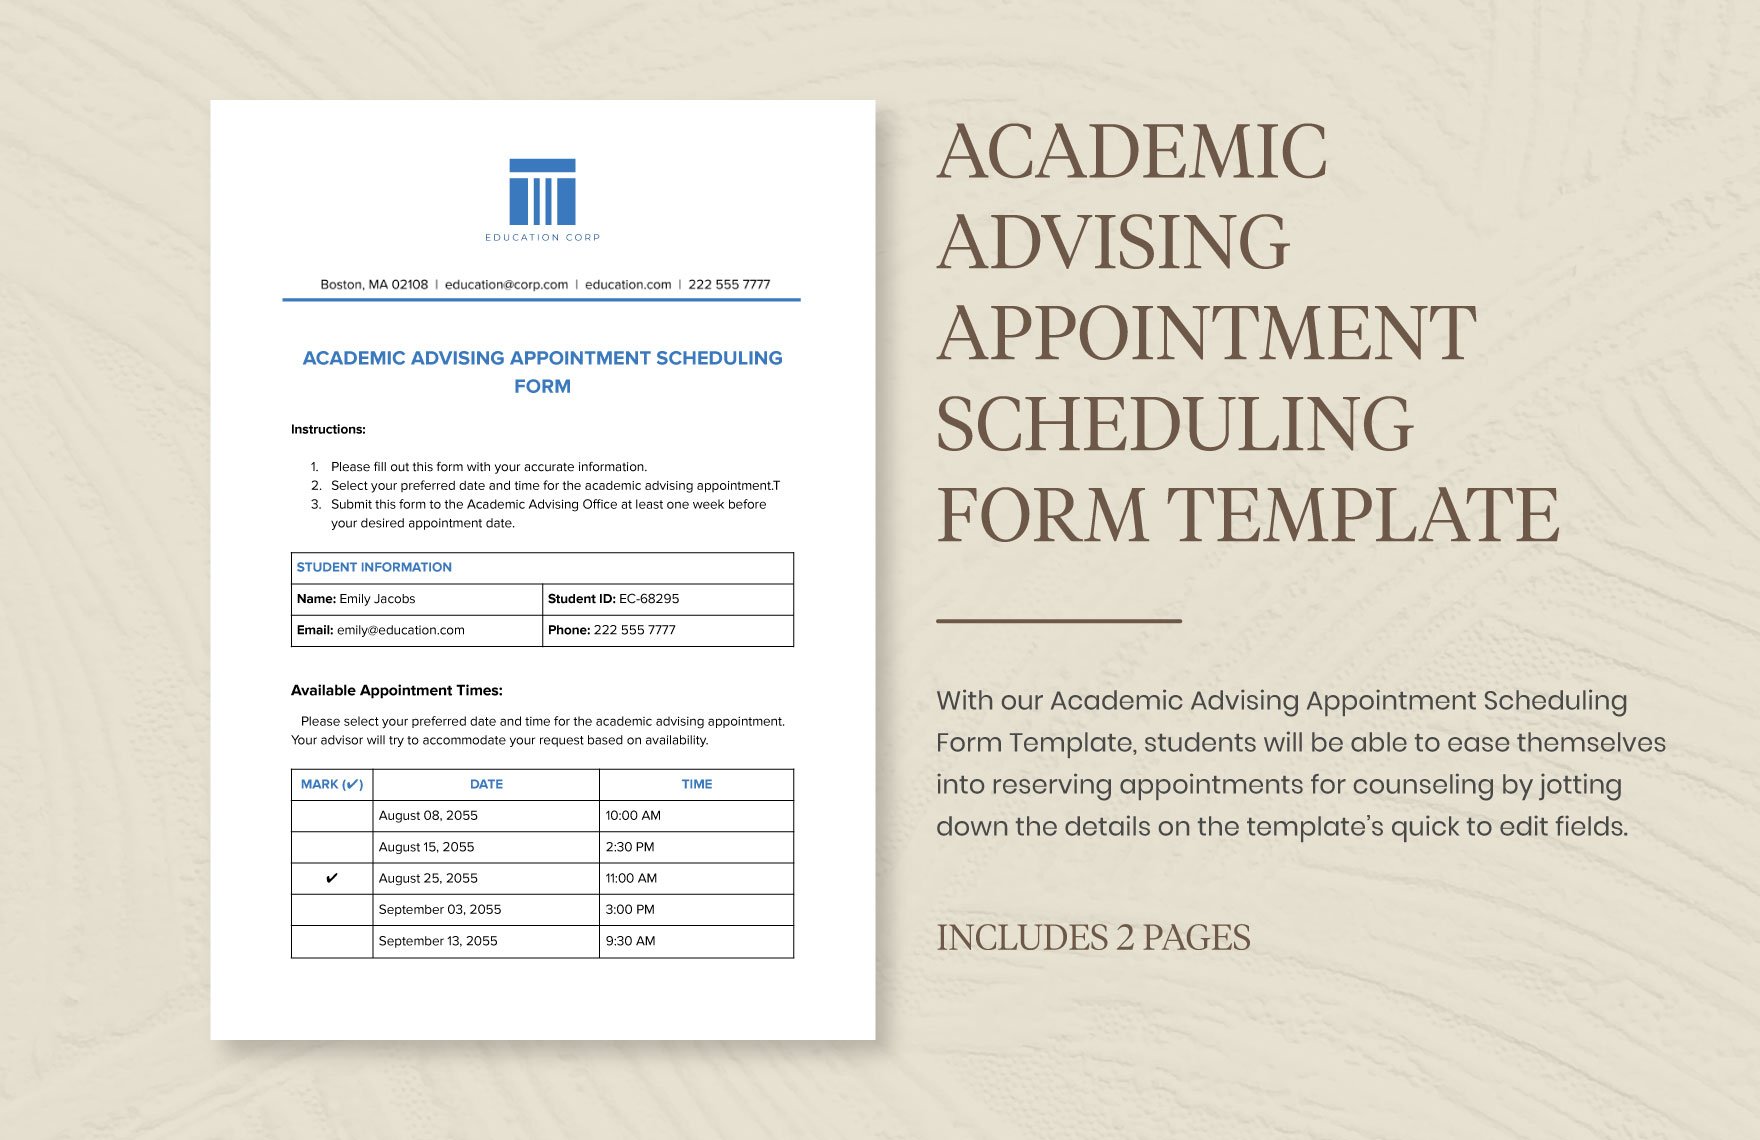 Academic Advising Appointment Scheduling Form Template